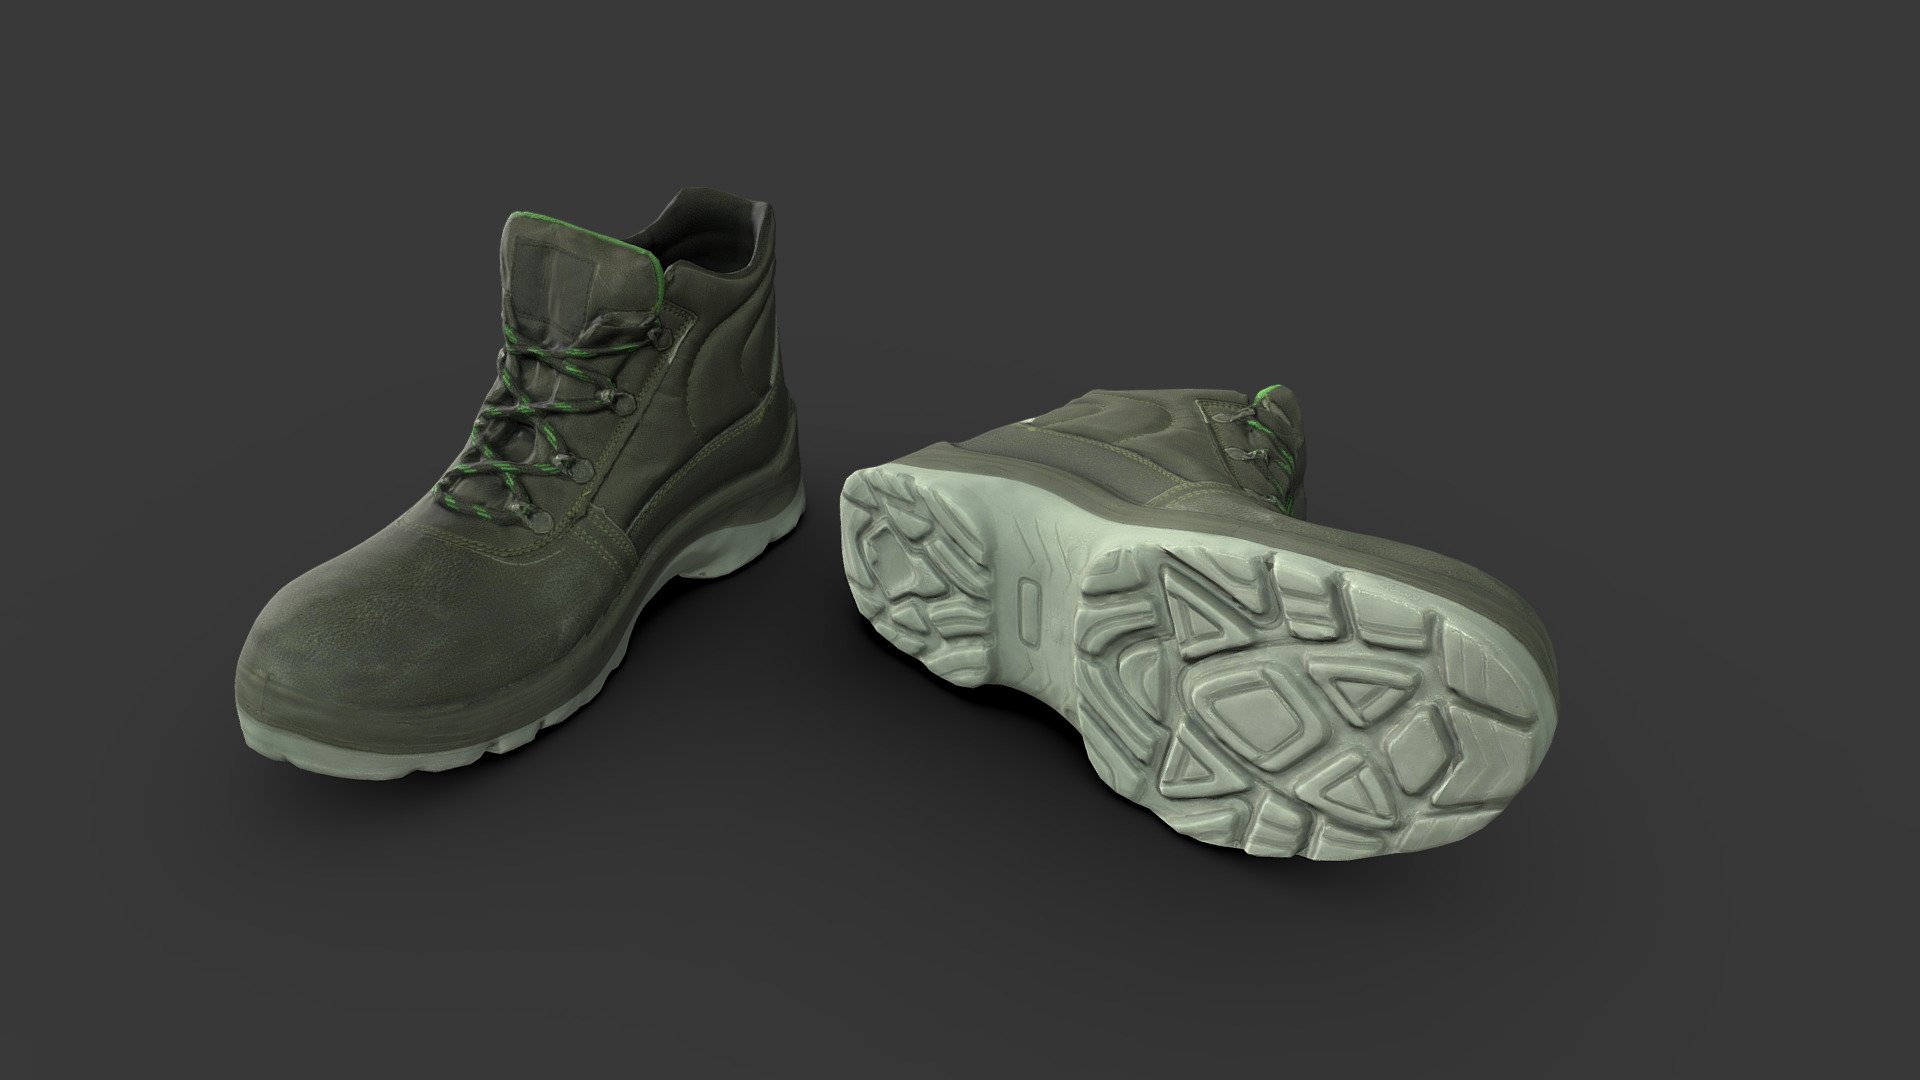 Pair of Boots Low Poly

Topology: Quads

Polygon count: 7220

Vertices count: 7222

Textures: Diffuse, Normal, Specular, Glossiness, Ambient Occlusion ( all in 4k resolution)

UV mapped with non-overlapping

All files are zipped in one folder. Contains 3 file formats obj, blend &amp; fbx

Useful for games, renders and other graphical projects.

Thank you for interest. Best regards! - Pair of Boots - Buy Royalty Free 3D model by Radju 3d model